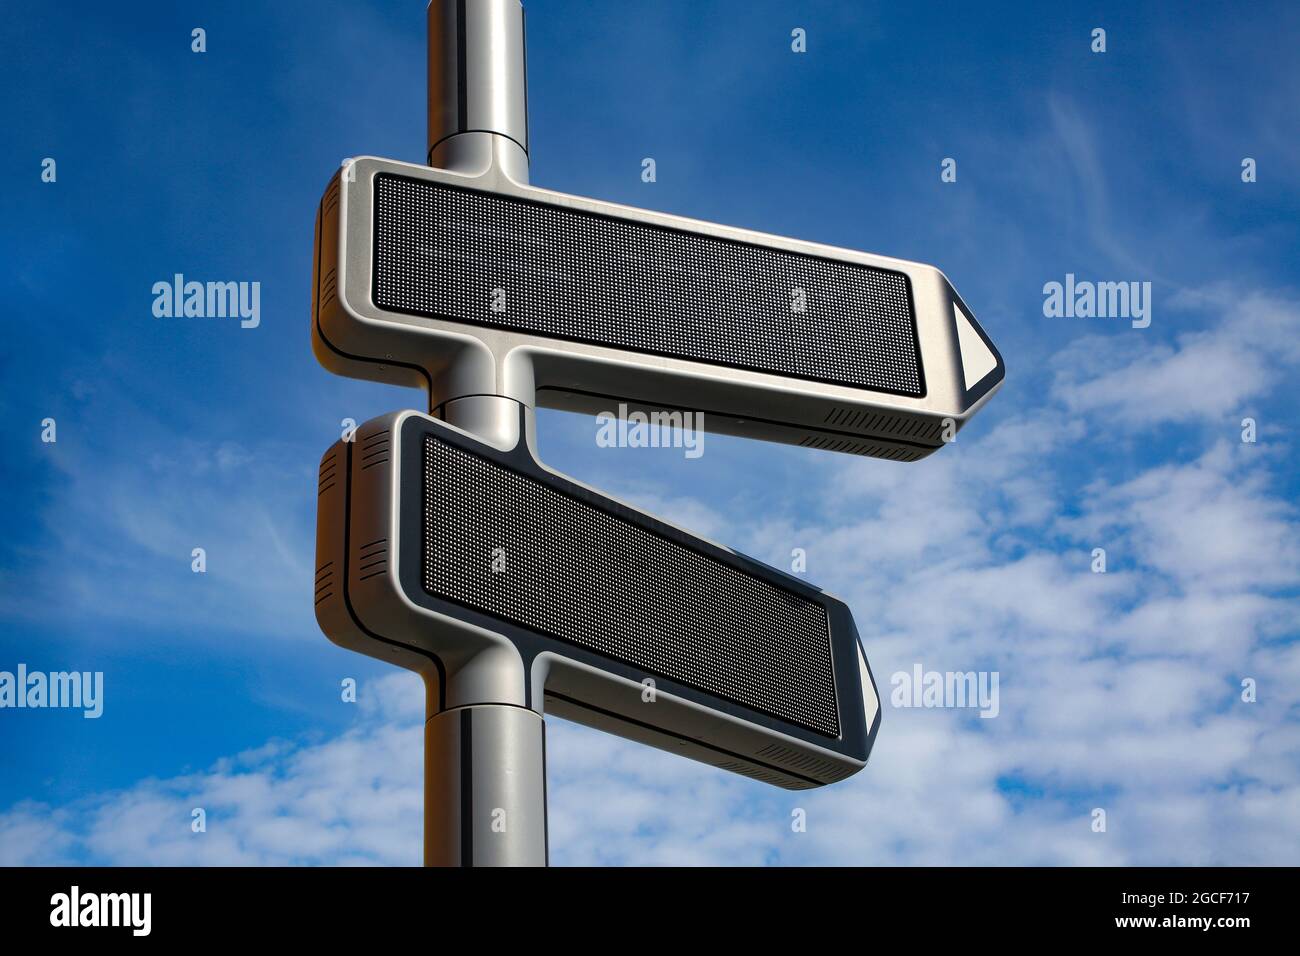 Modern digital sign post. Moves to direction to point and displays information as text and images, Stavanger, Norway. Stock Photo